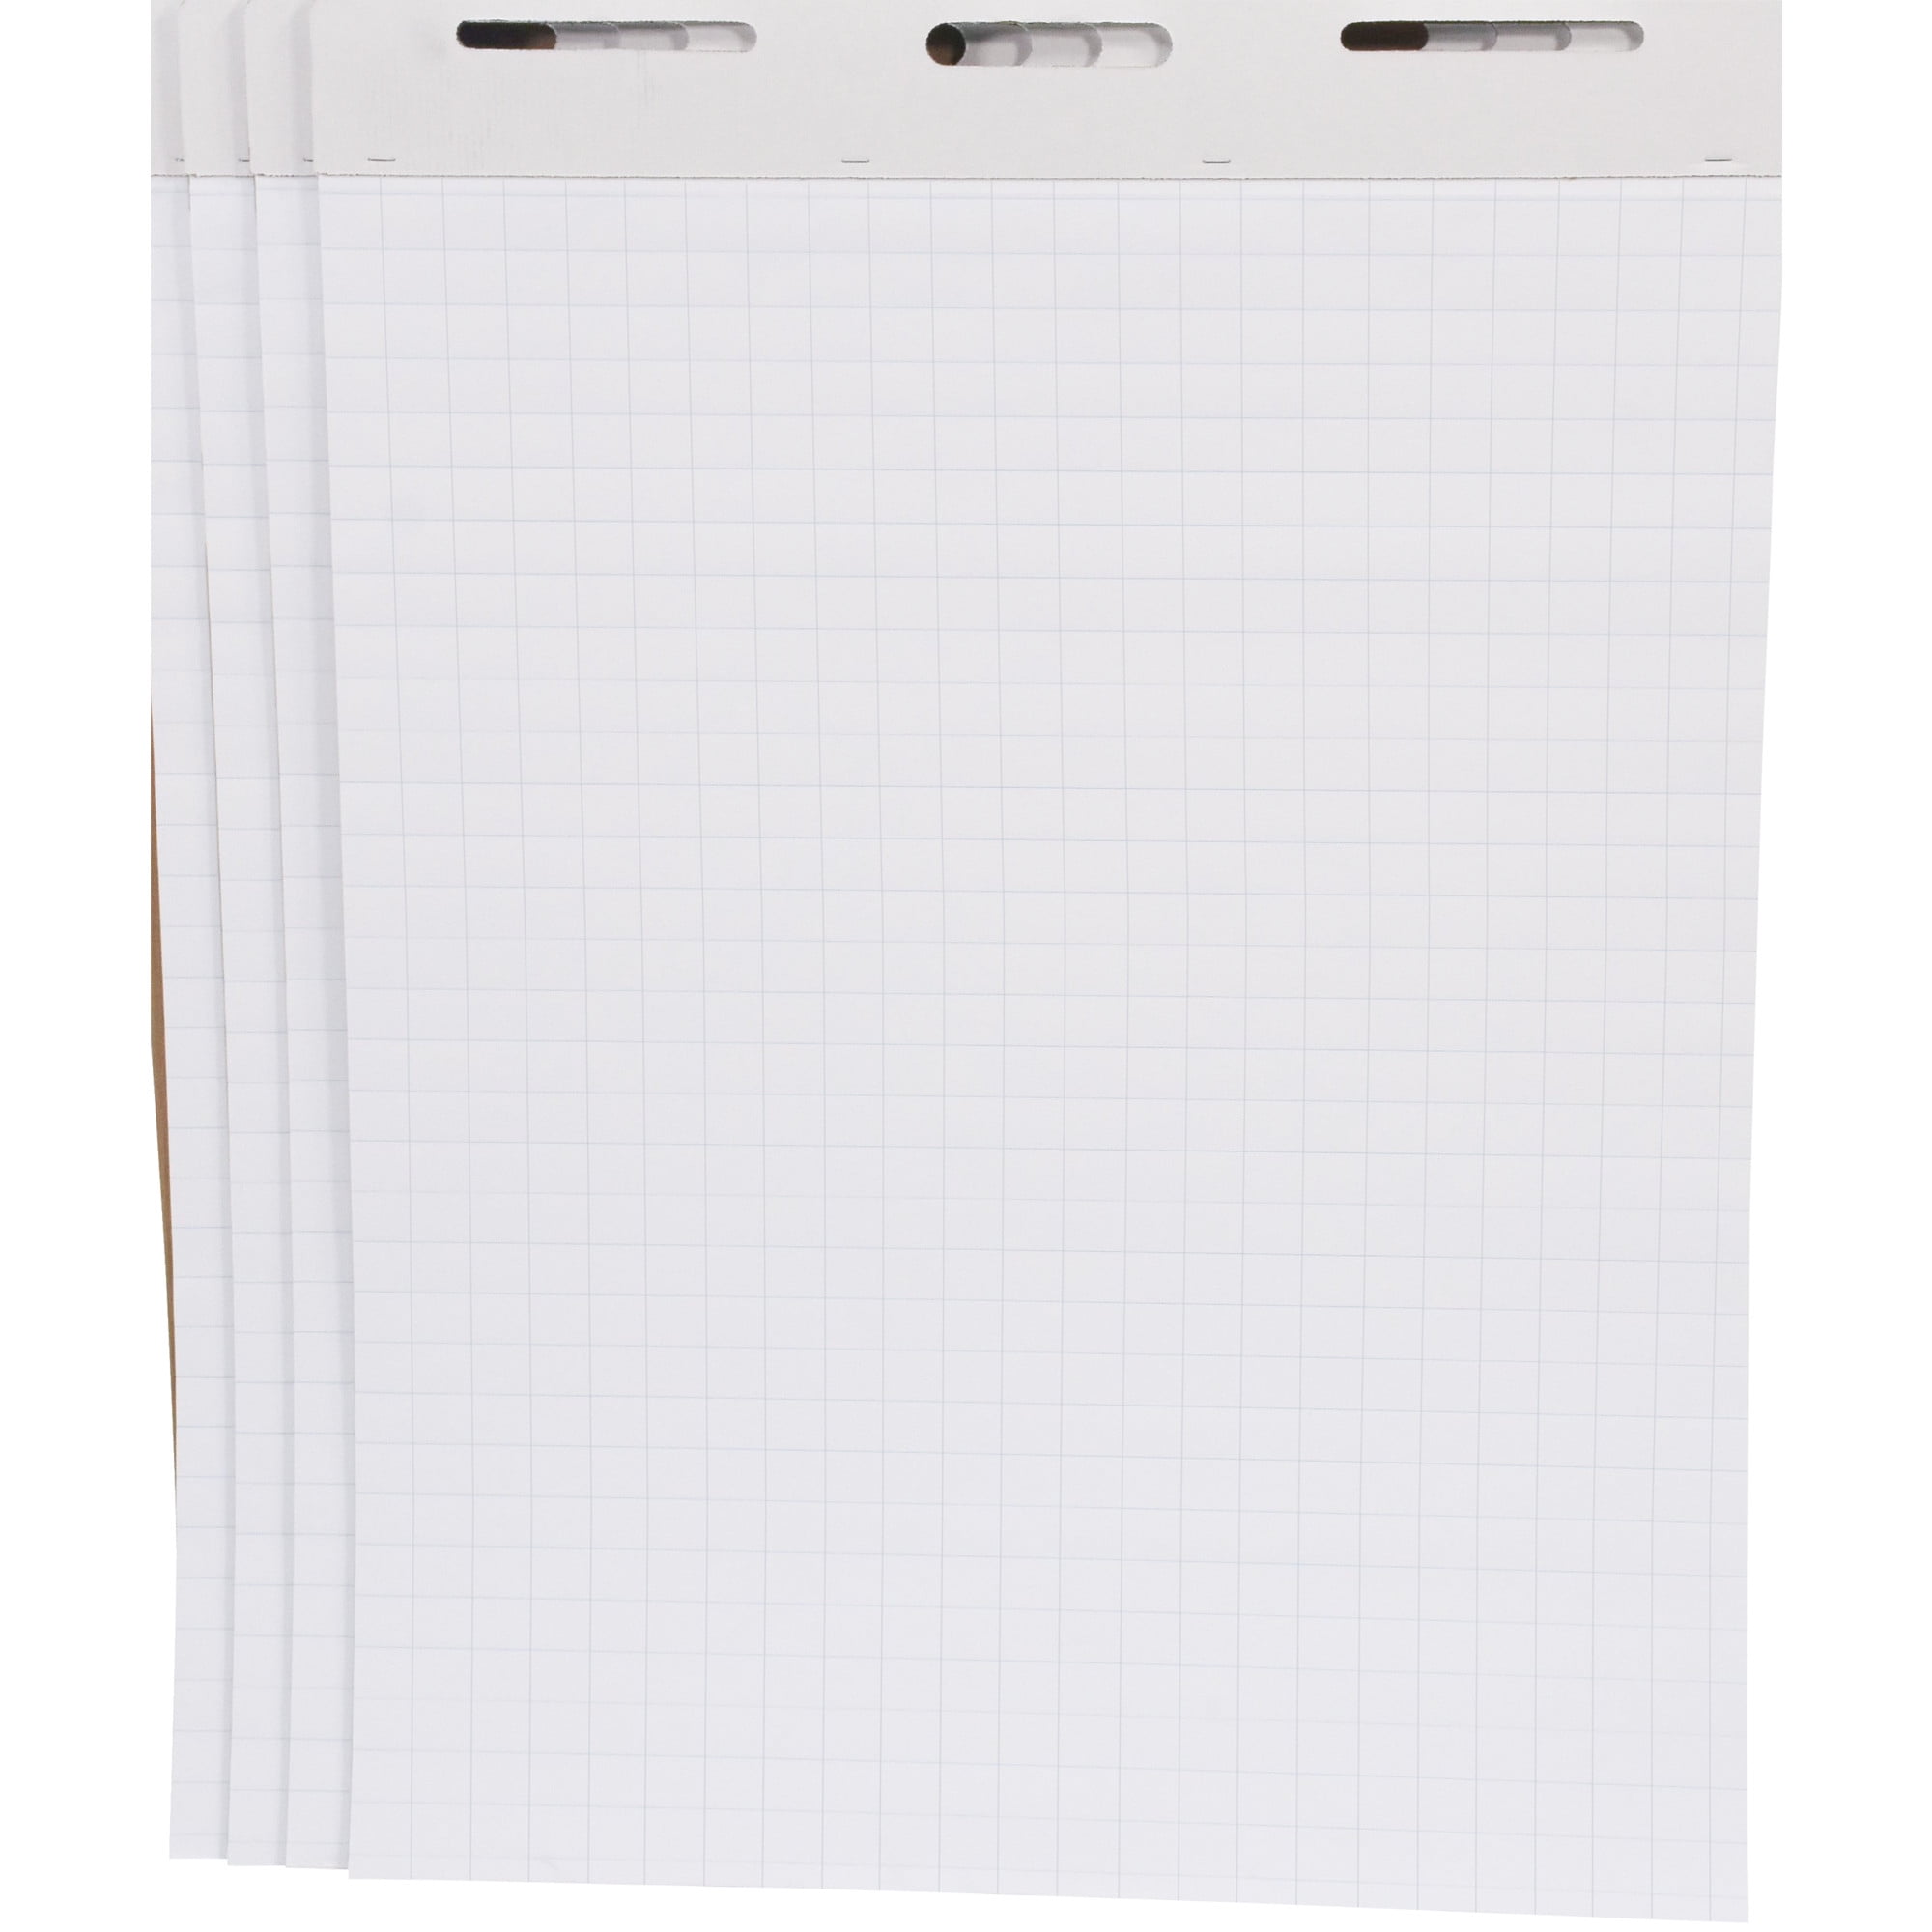  Easel Pads & Flip Chart Paper - Easel Pads & Flip Chart Paper  / Paper: Stationery & Office Supplies